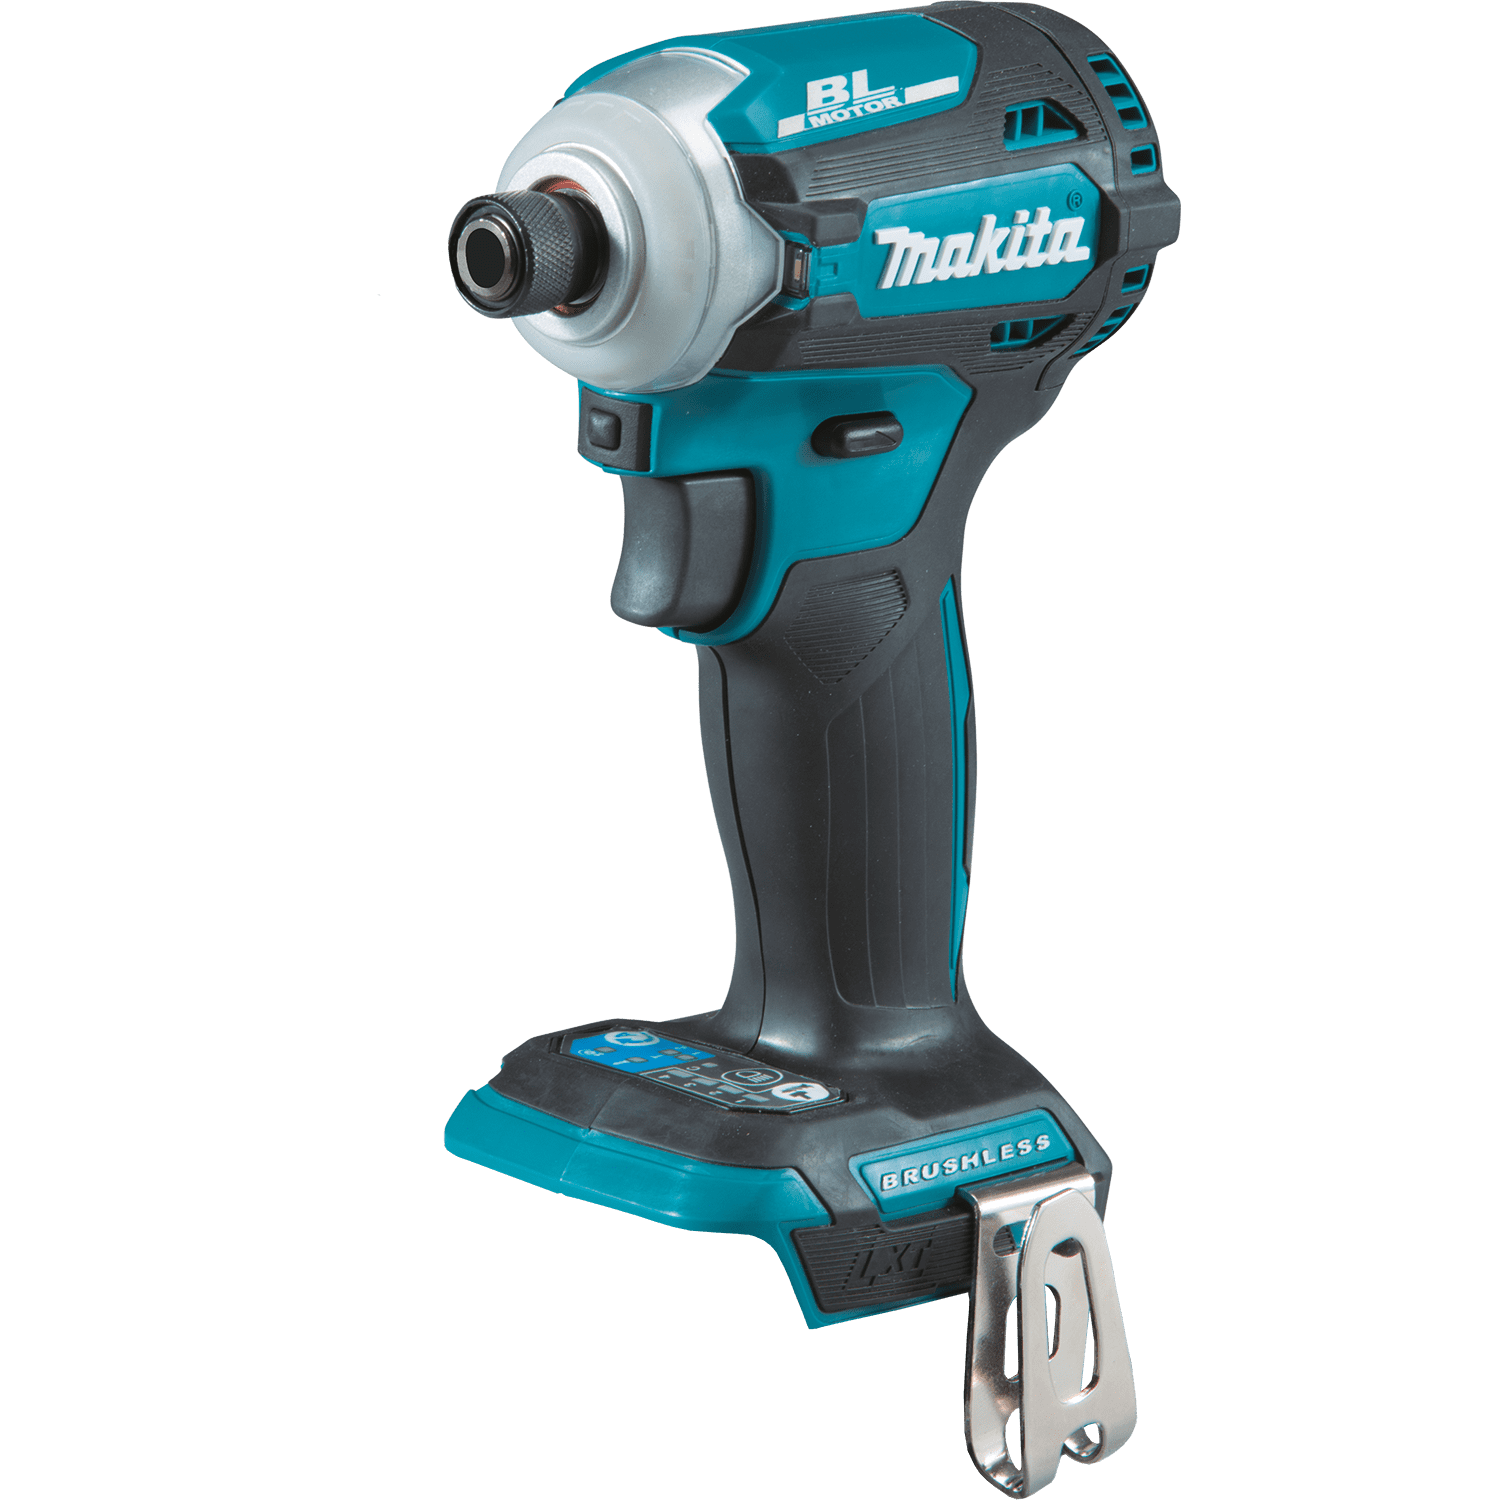 MAKITA 18V LXT Lithium-Ion Brushless Cordless Quick-Shift Mode Driver, Tool Only | Tallman Equipment Company